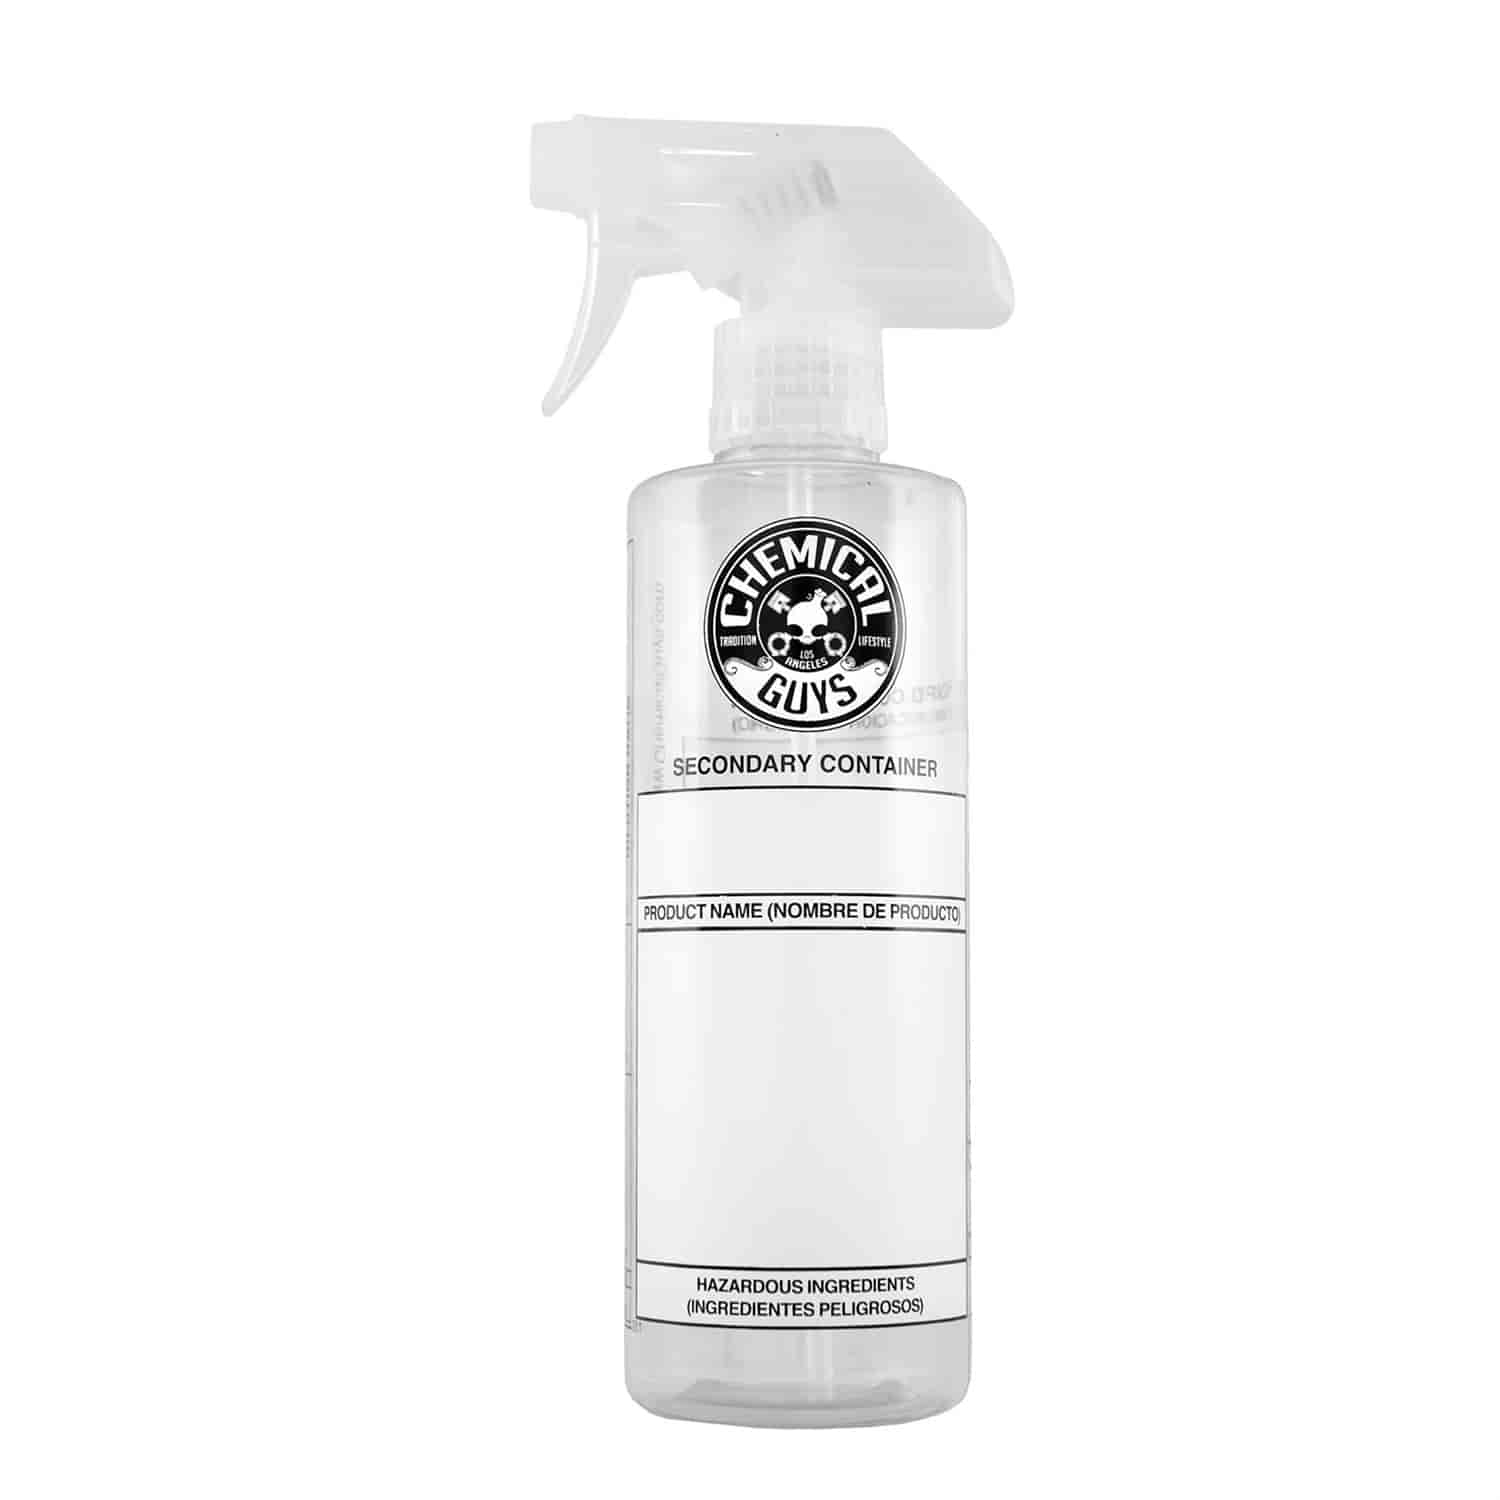 Secondary Container Dilution Spray Bottle, 16 oz.